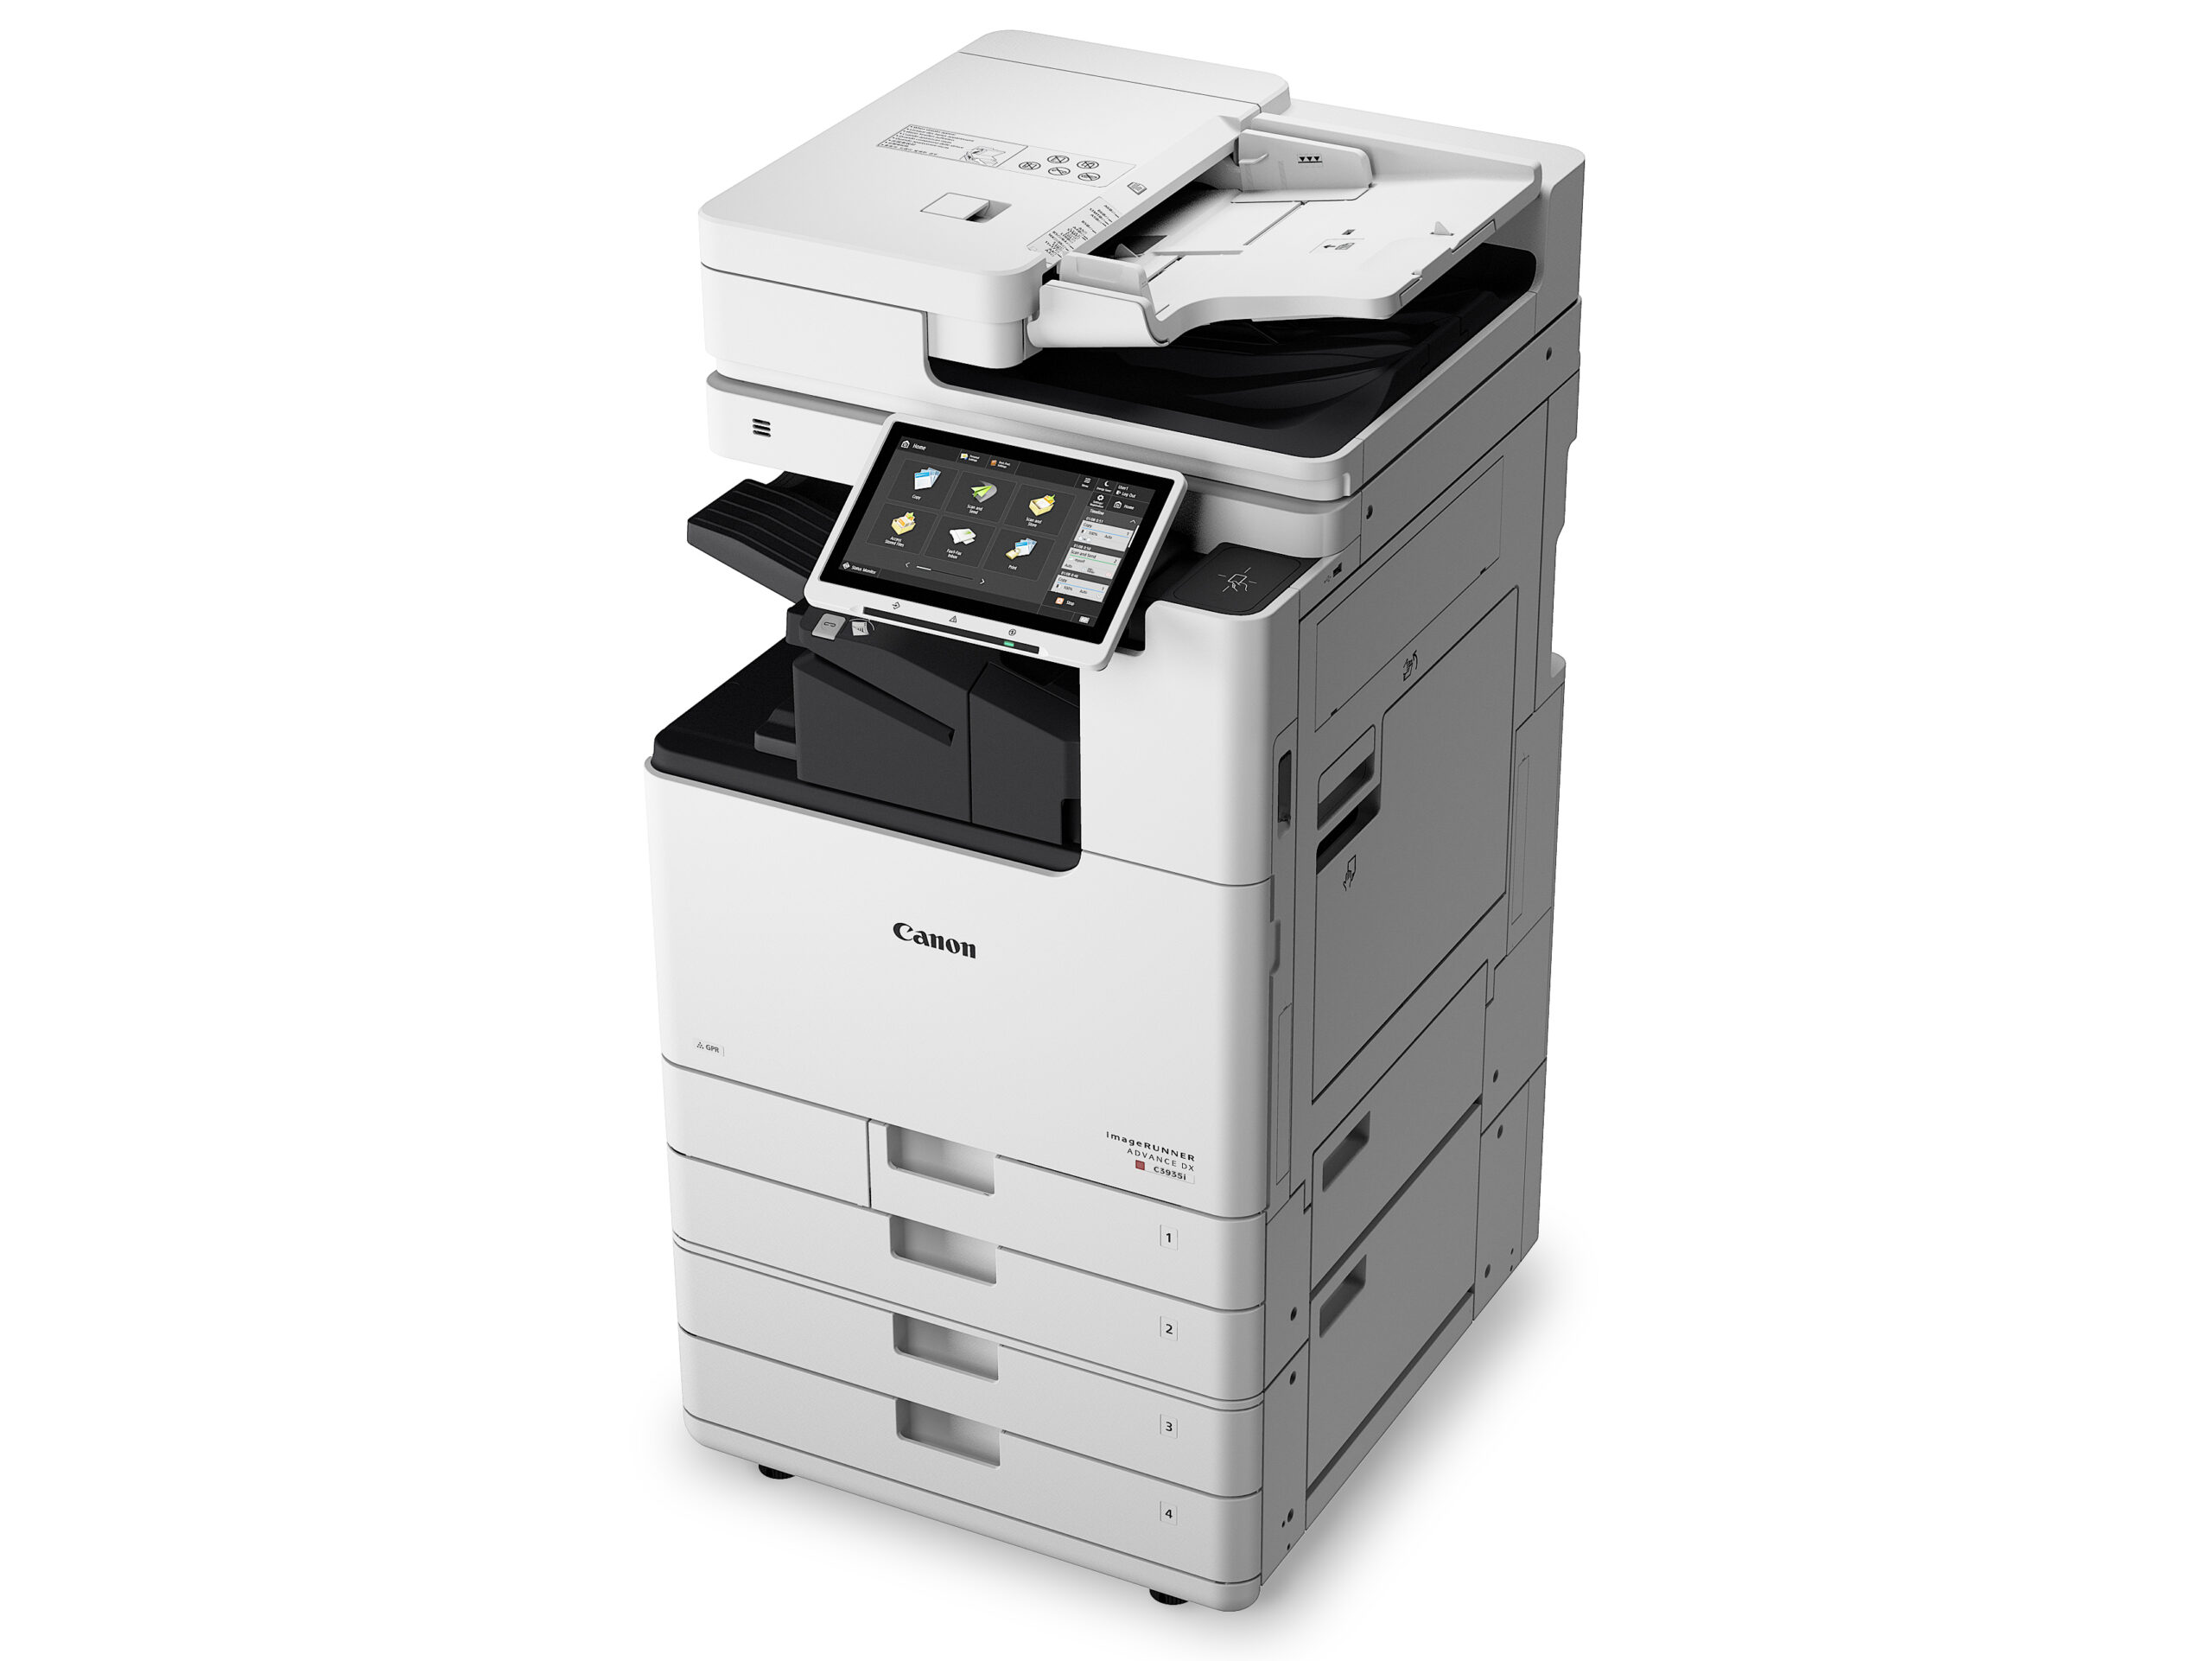 Featured image for “Canon DX 3925 Color Copier”